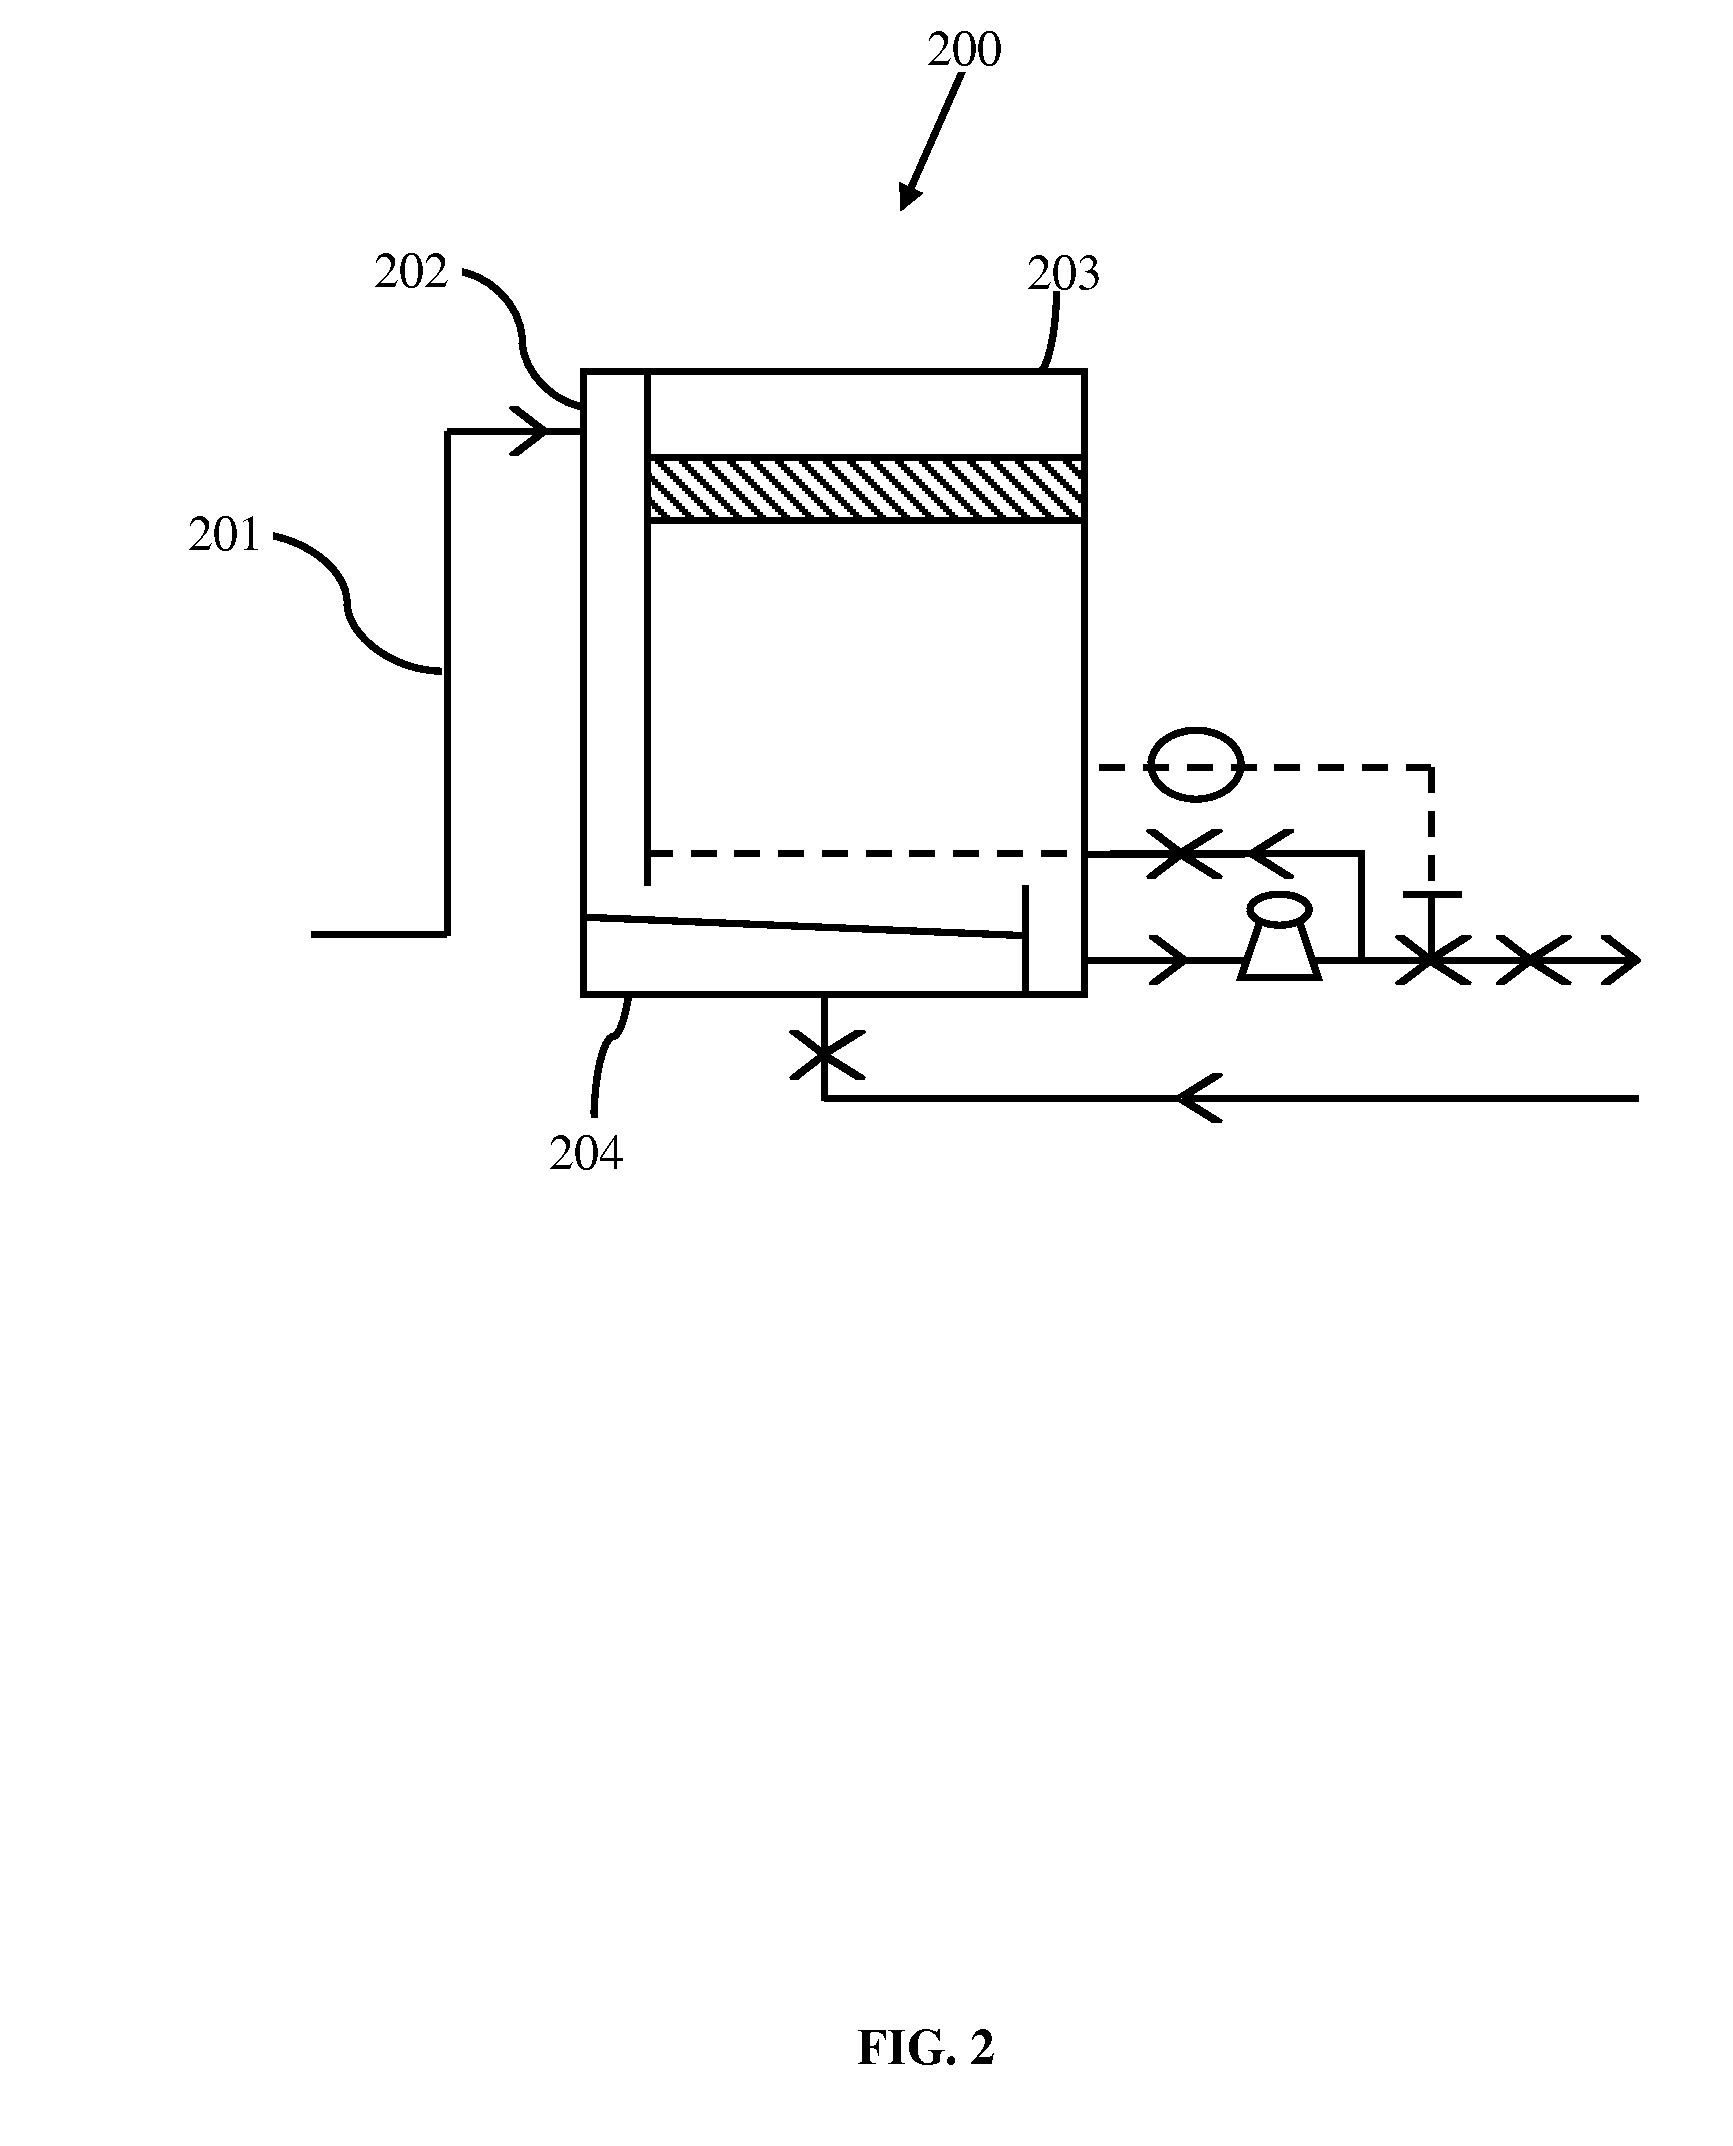 Novel horizontal method for tray distillation and other gas-liquid contact operations